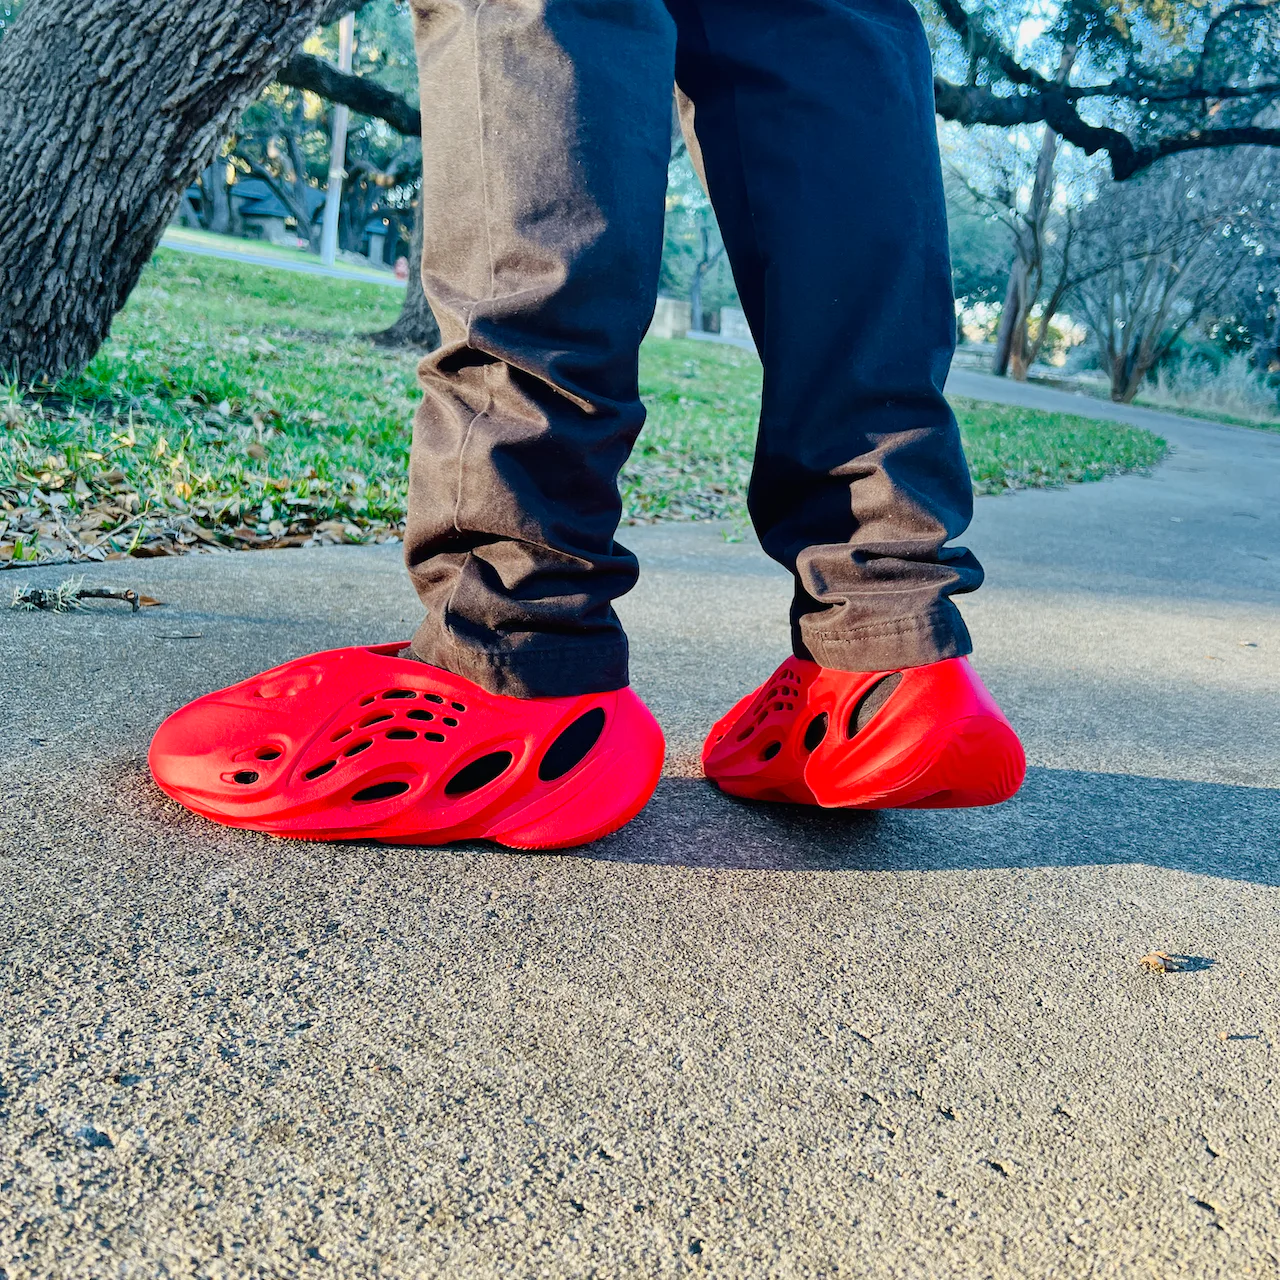 The Yeezy Foam Runner: A Comprehensive Review